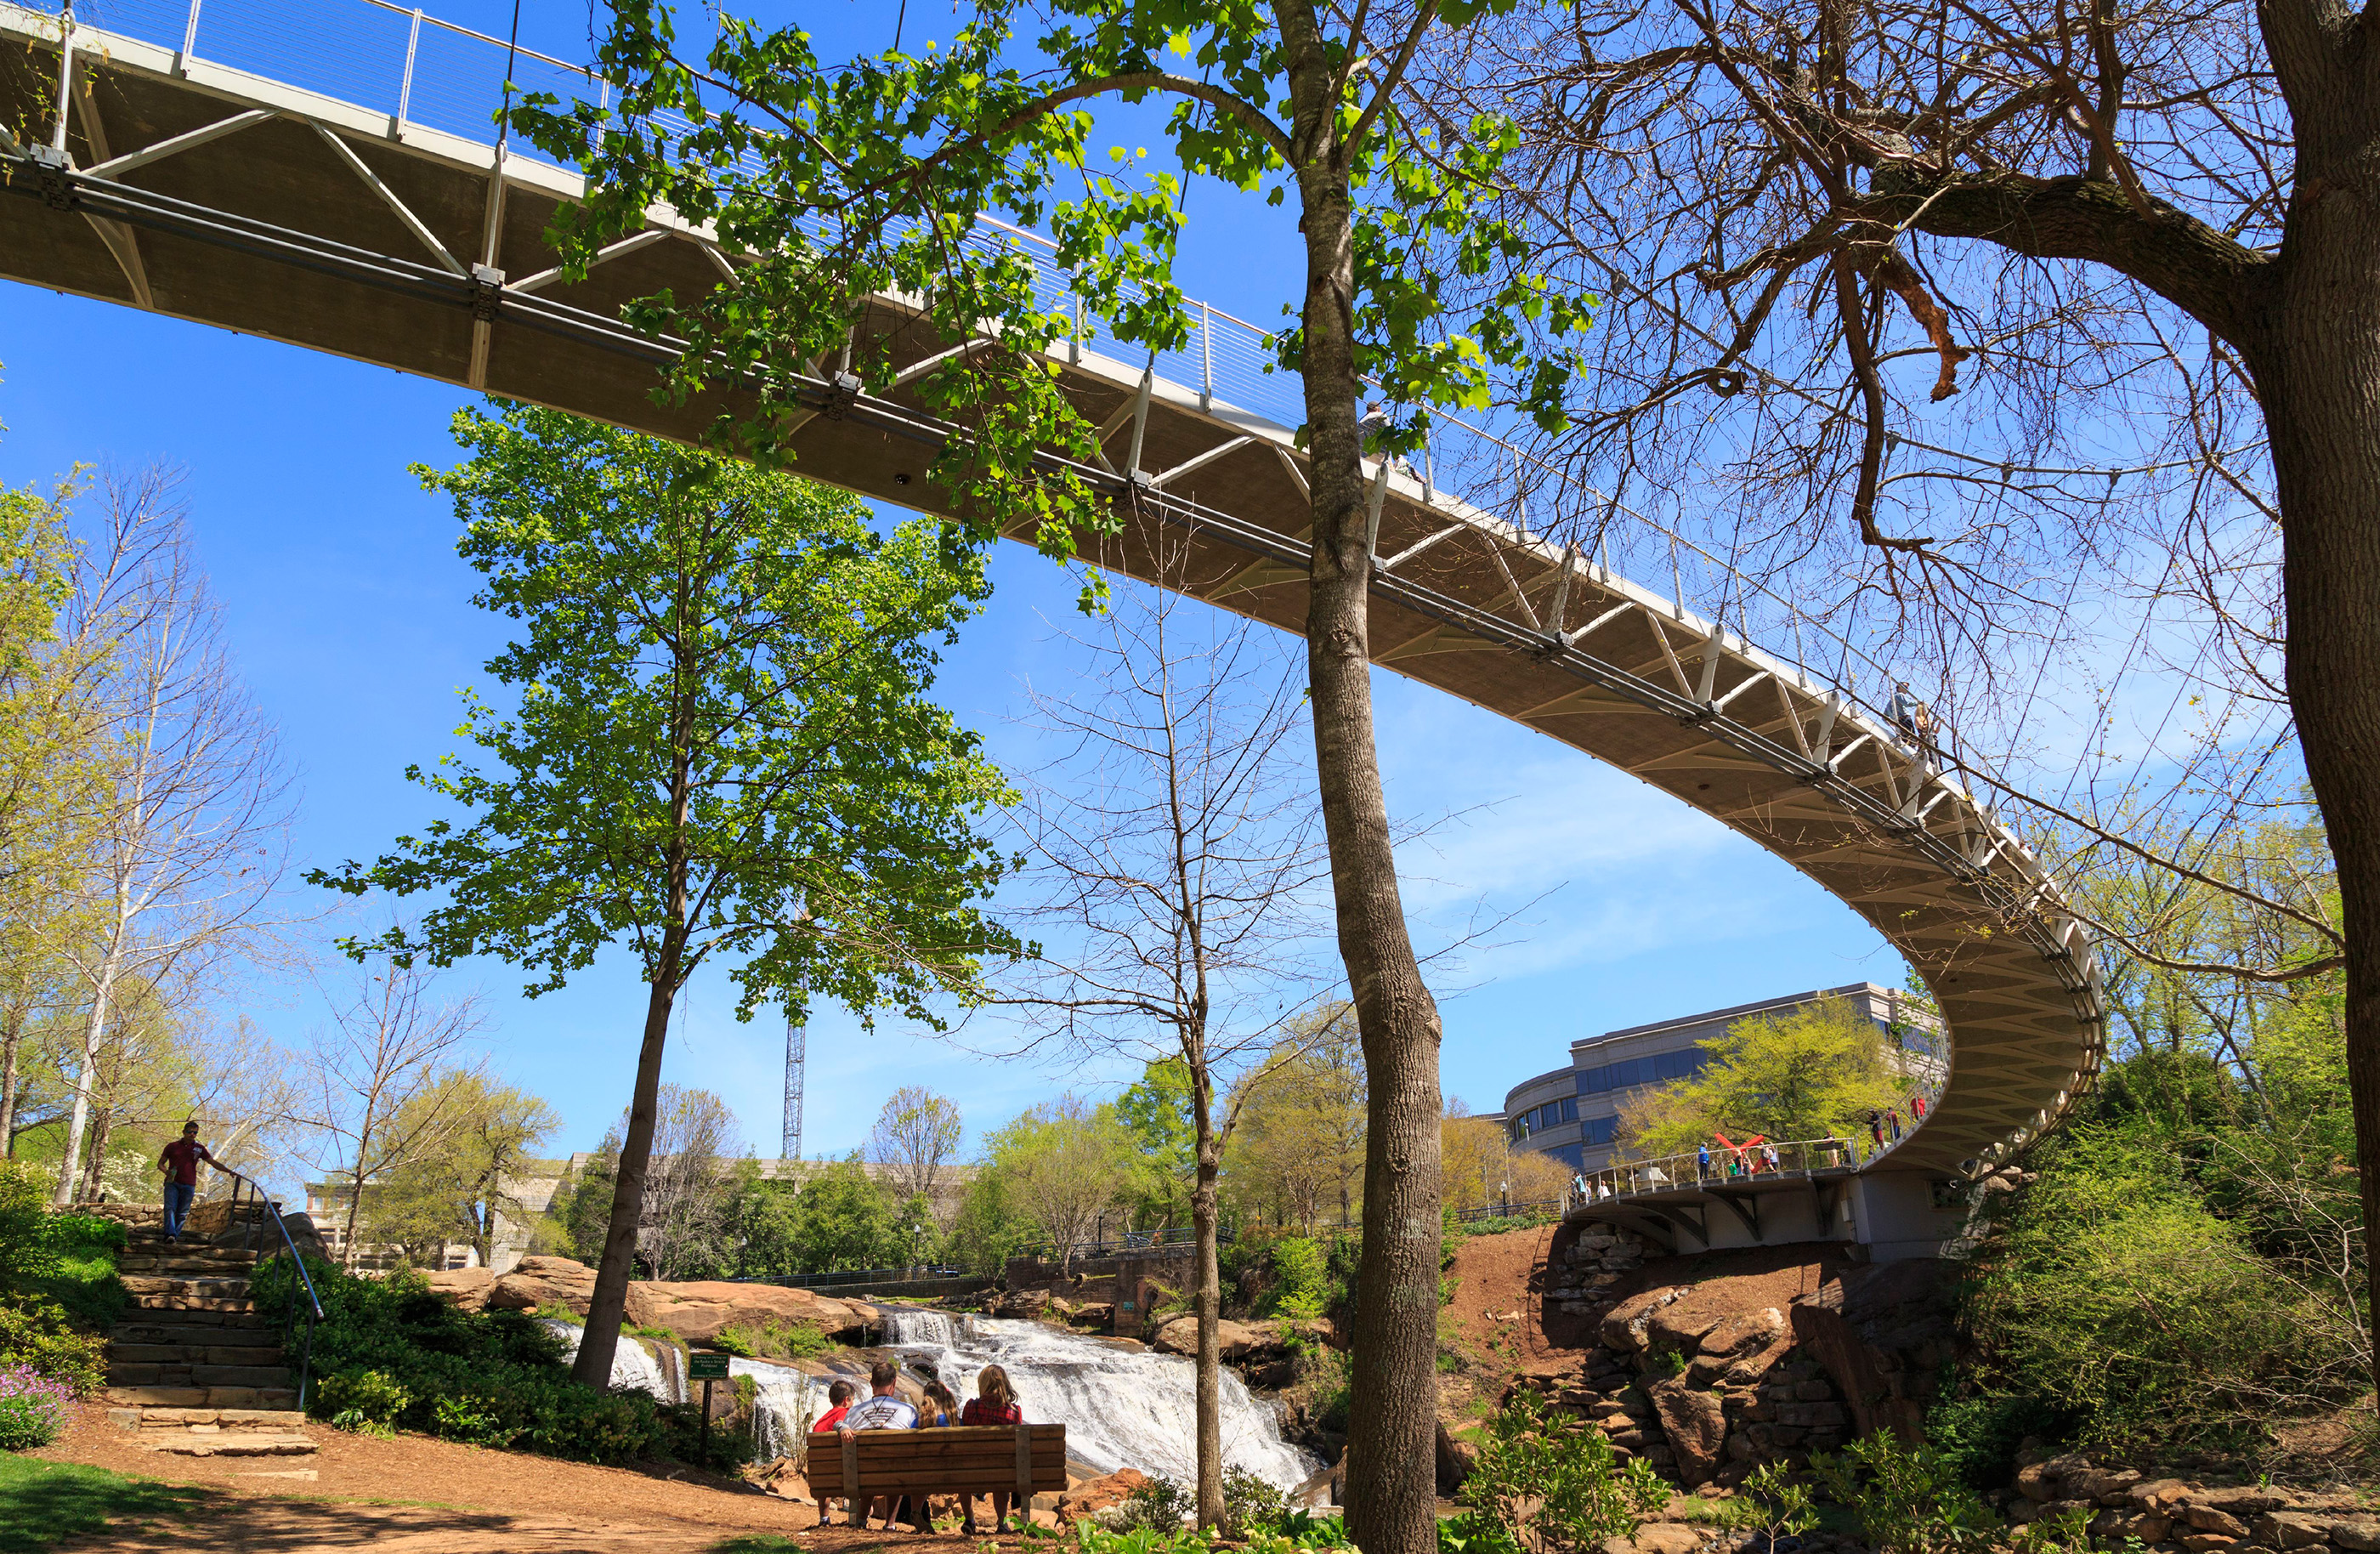 Liberty Bridge and Falls Park on the Reedy in Spring, Greenville, South Carolina